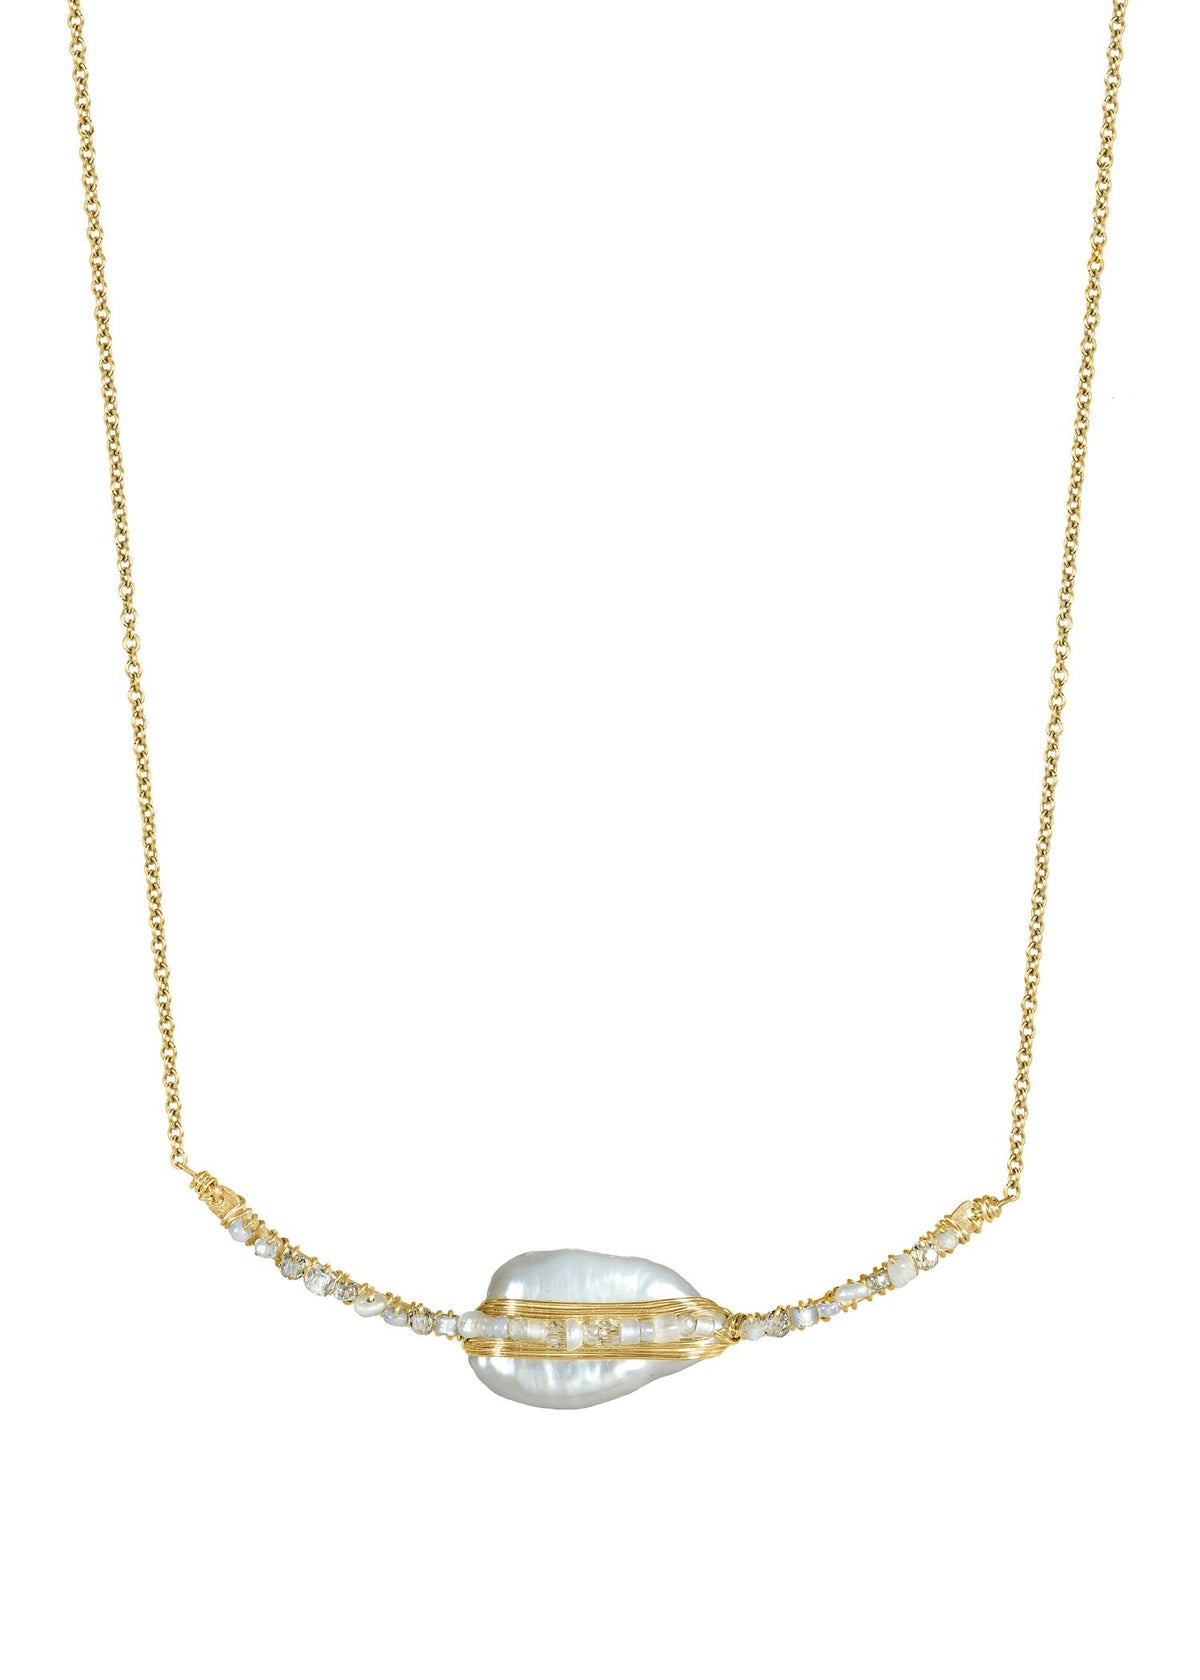 Fresh water pearls White moonstone Crystal Seed beads 14k gold fill Necklace measures 16-1/2&quot; necklace Pendant measures 7/16&quot; in length and 2-1/2&quot; in width Handmade in our Los Angeles studio